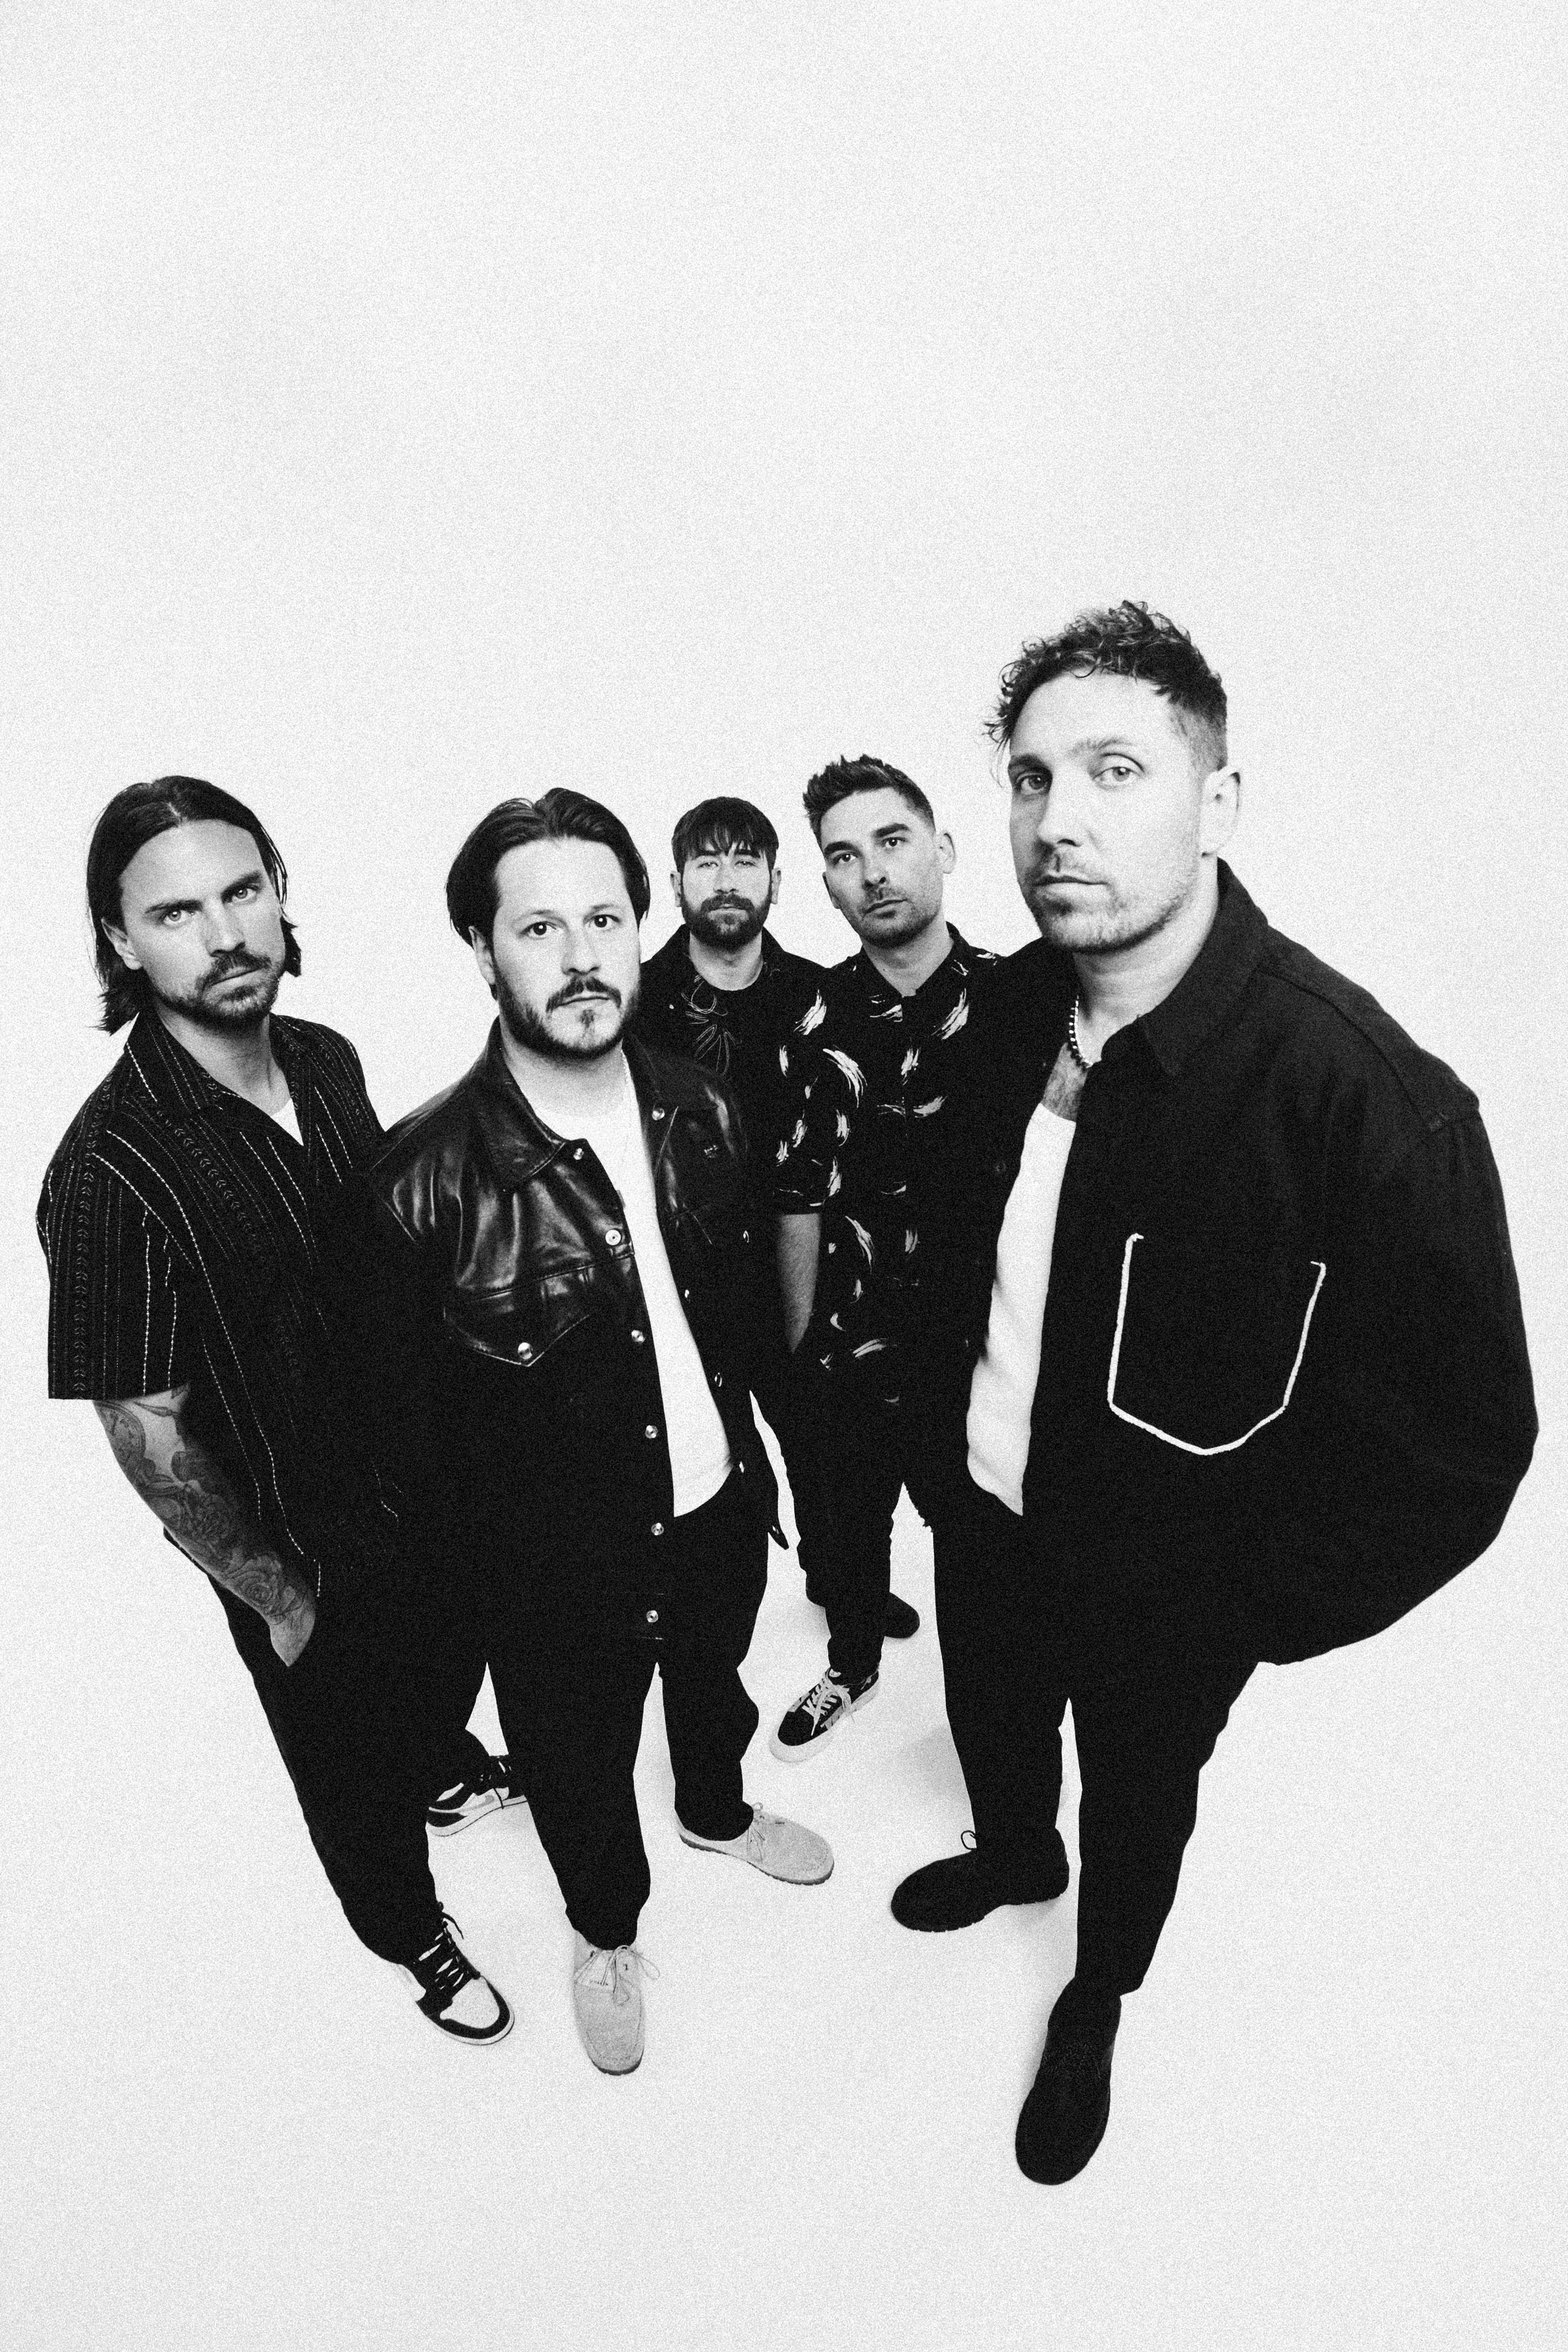 You Me At Six - the Final Nights of Six presale code for real tickets in Southampton